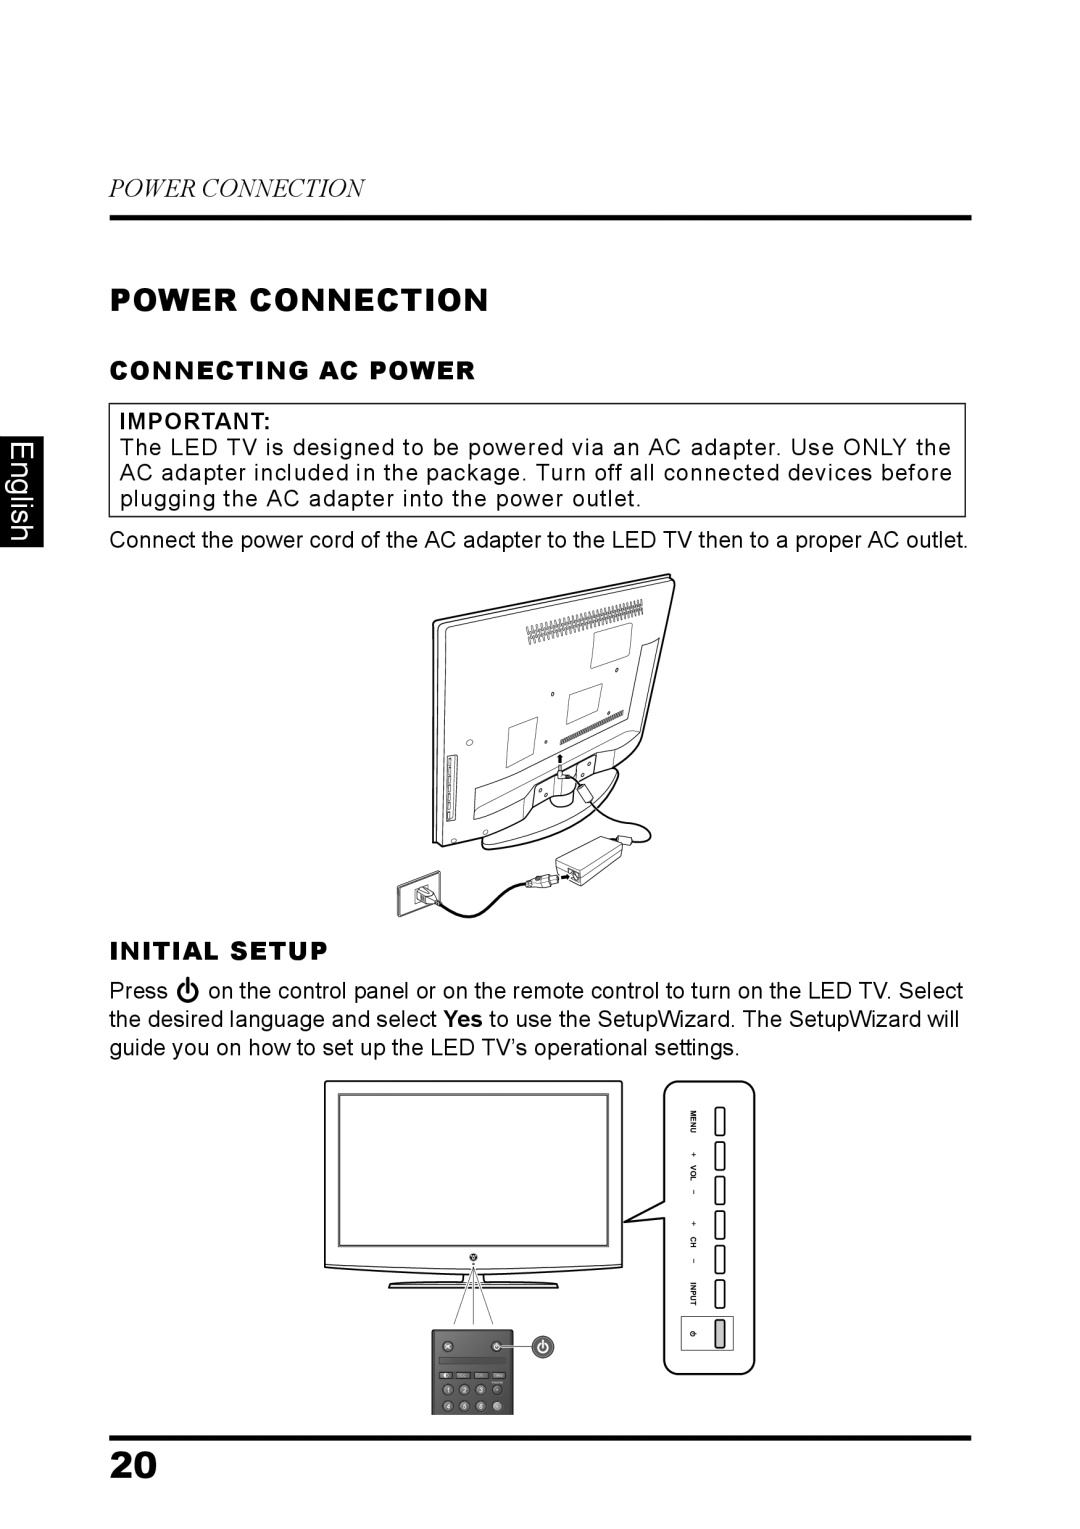 Westinghouse LD-3237 user manual Power Connection, English, Connecting Ac Power, Initial Setup 